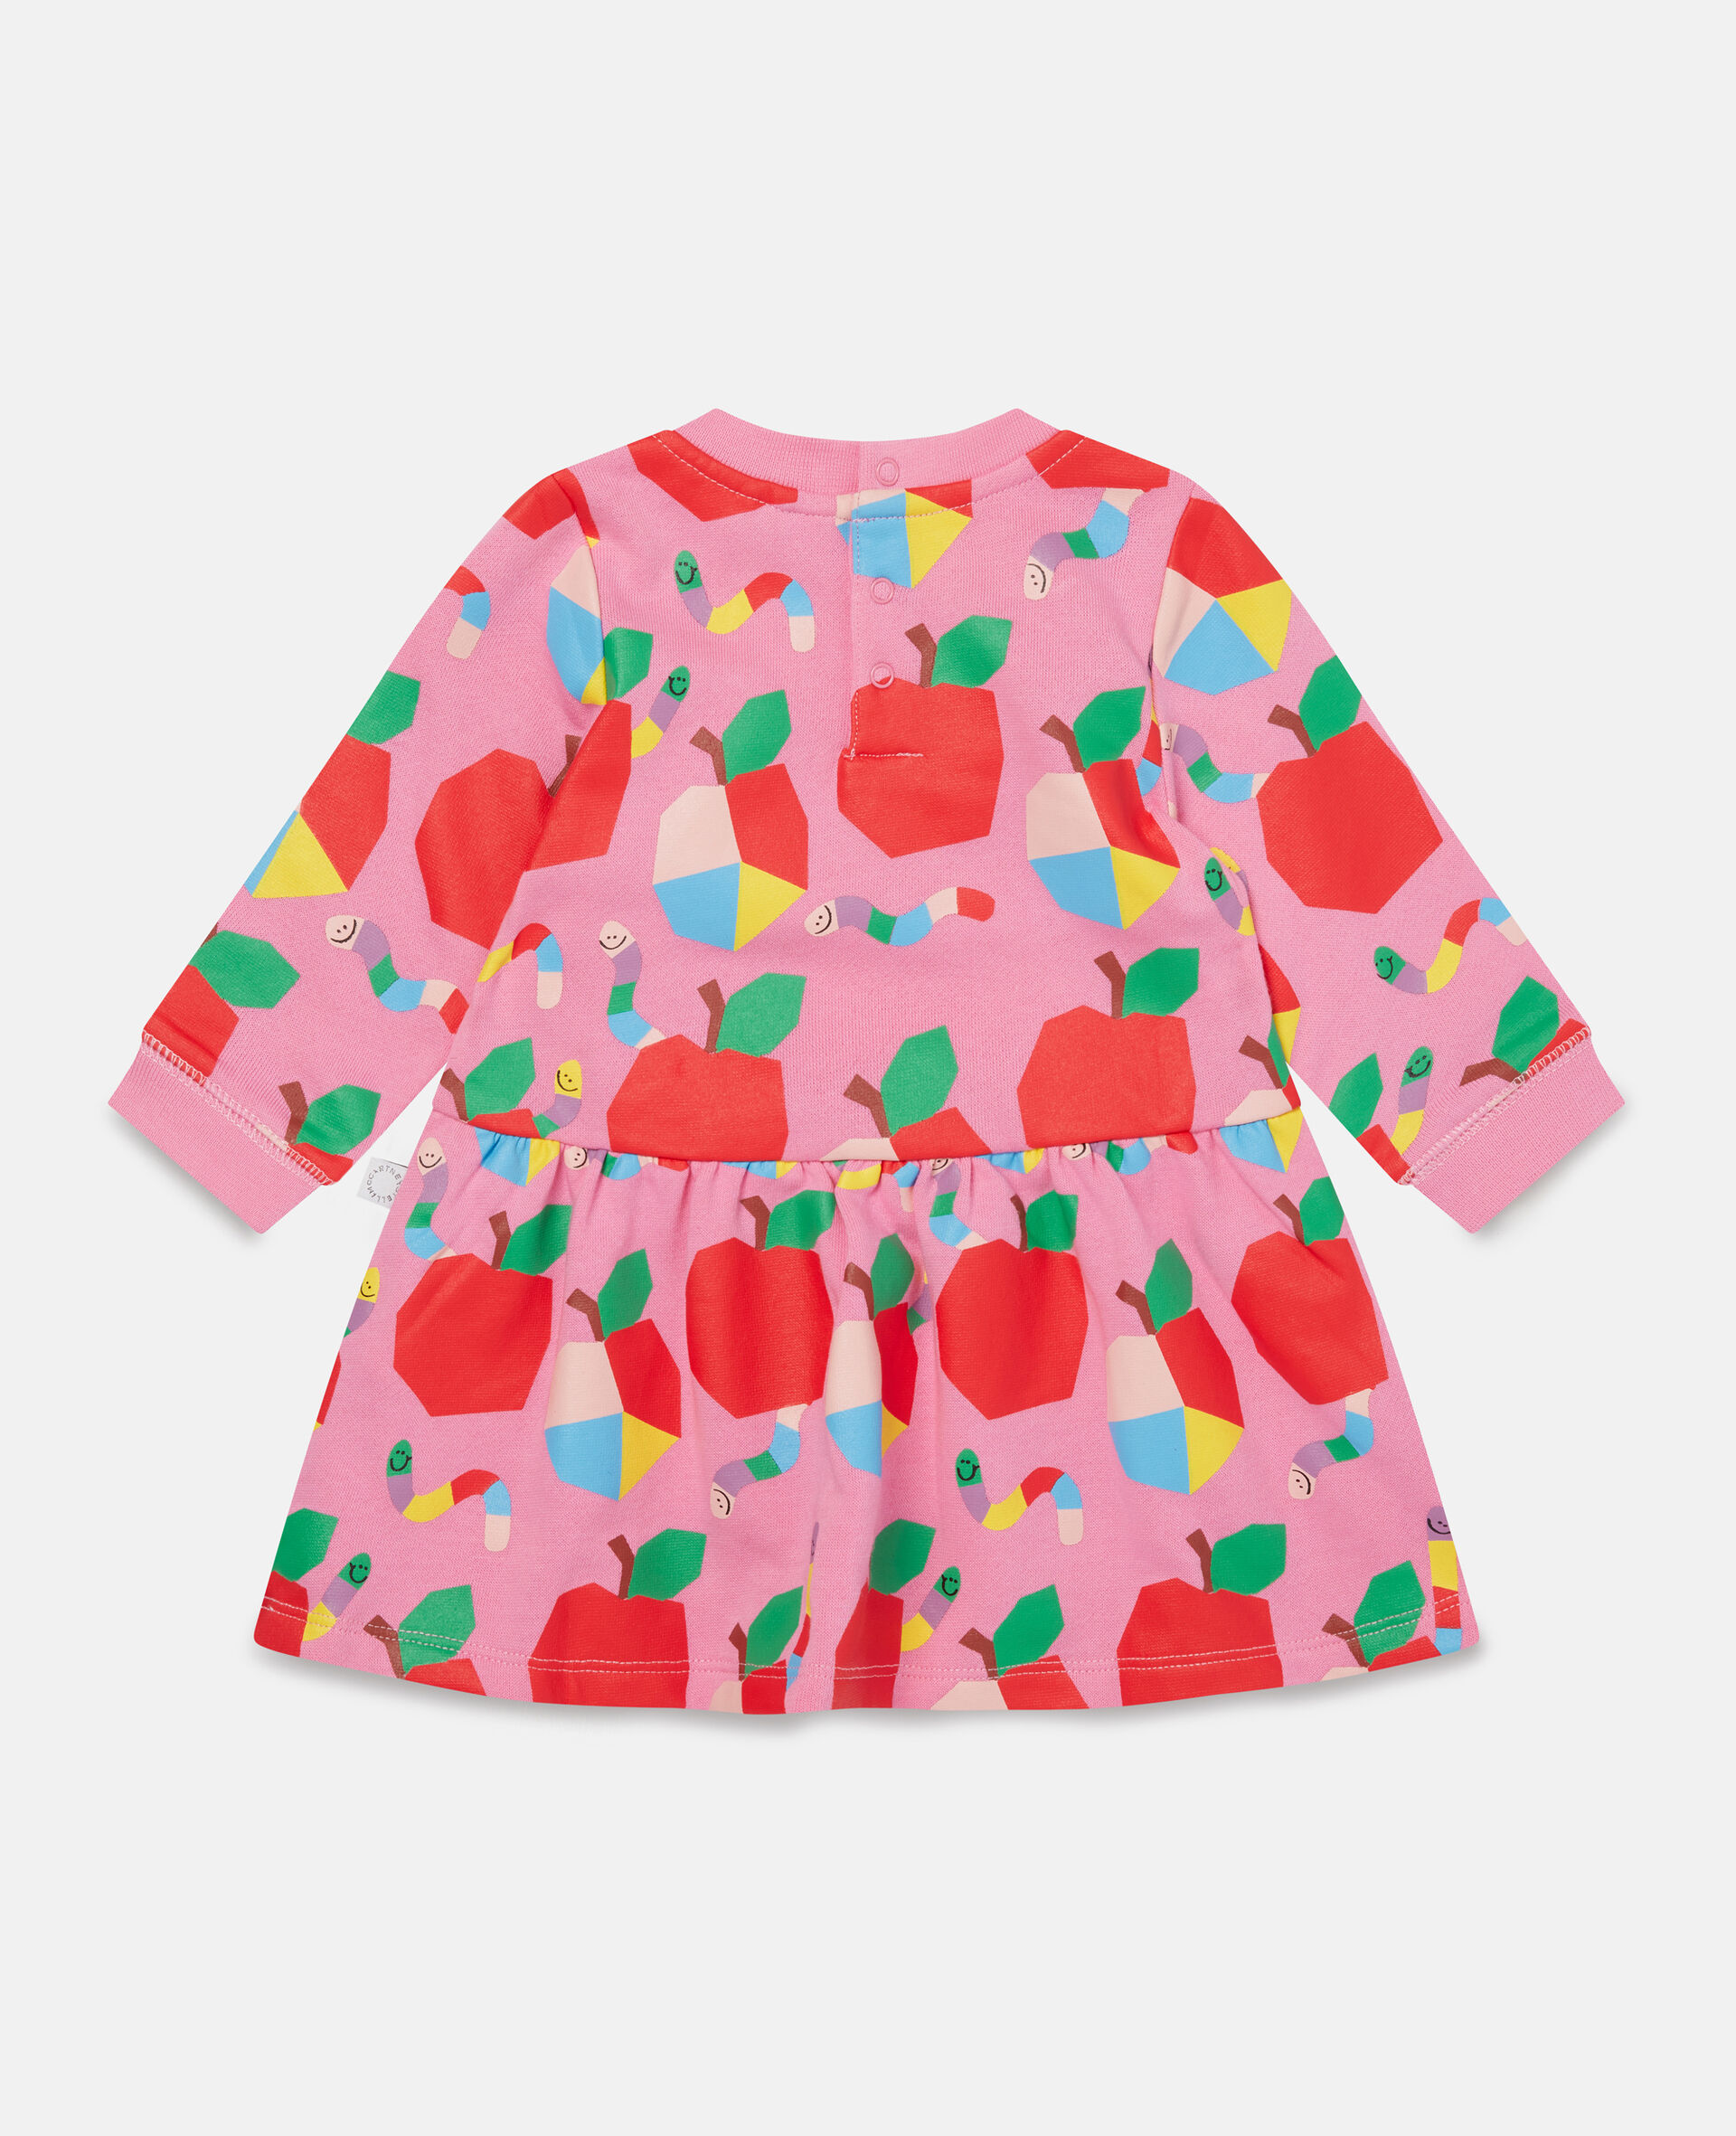 Cotton Fleece Apples and Worms Print Dress-Pink-large image number 1